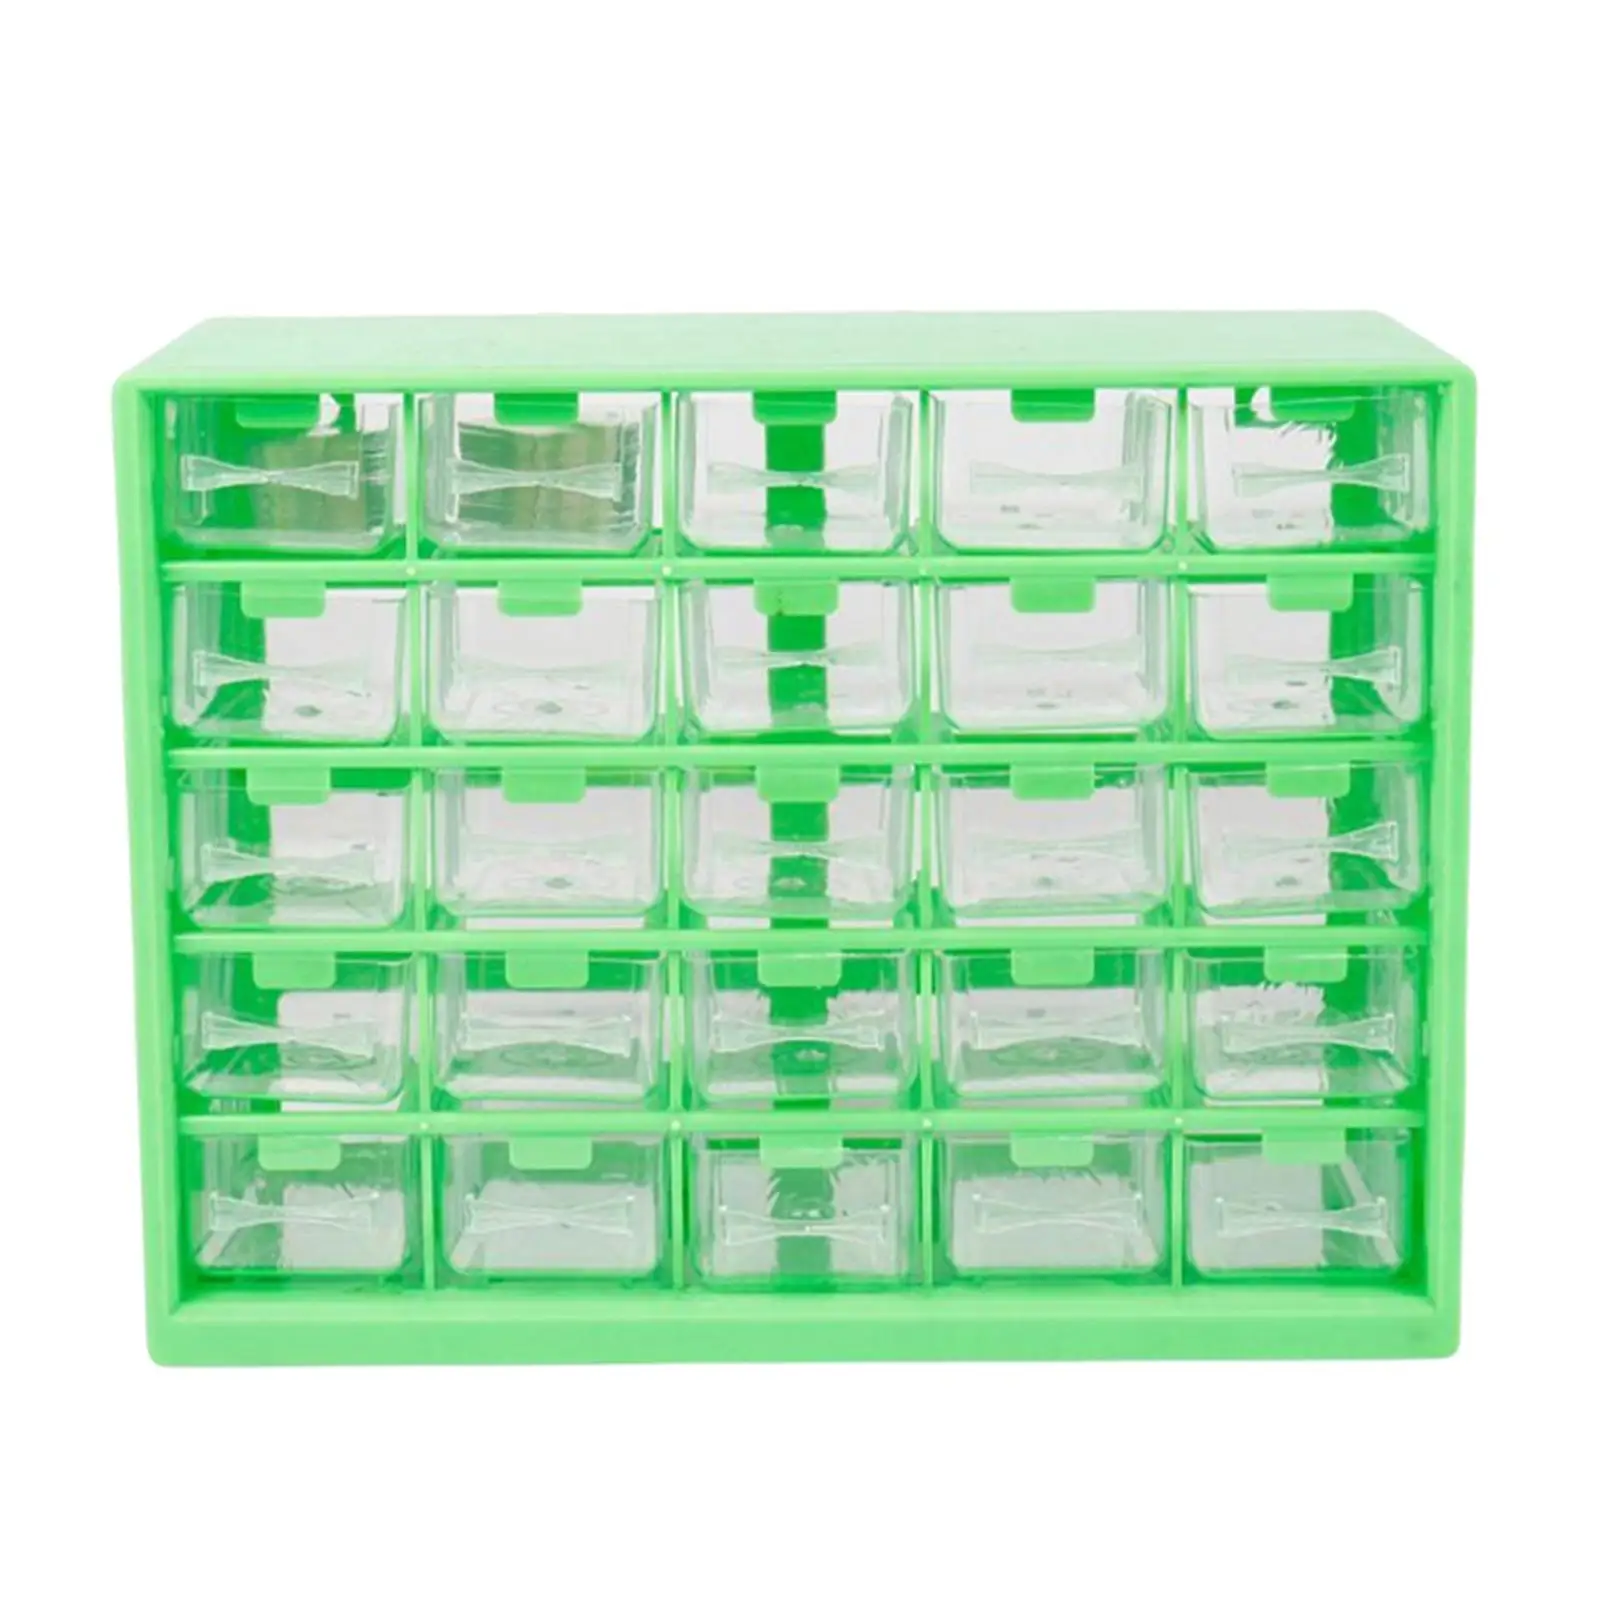 25 Drawer Hardware Parts Organizers Tool Box Storage Bins for Bolts Small Parts Screws